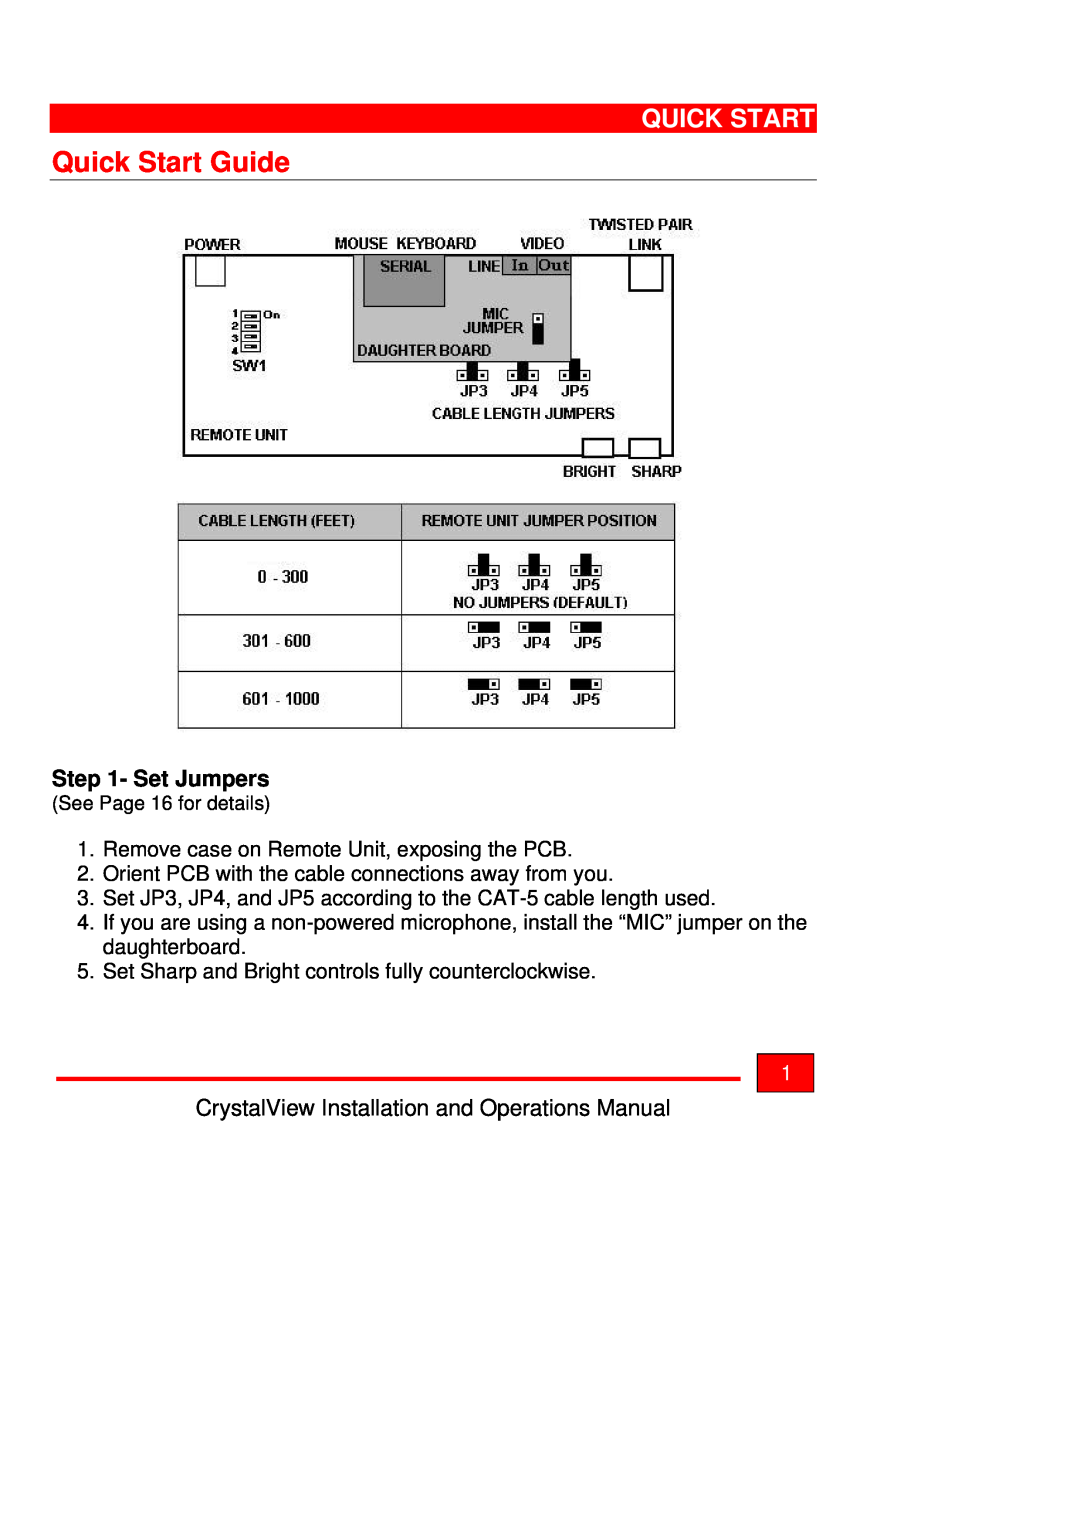 Rose electronic Crystal View operation manual Quick Start Guide, Set Jumpers 